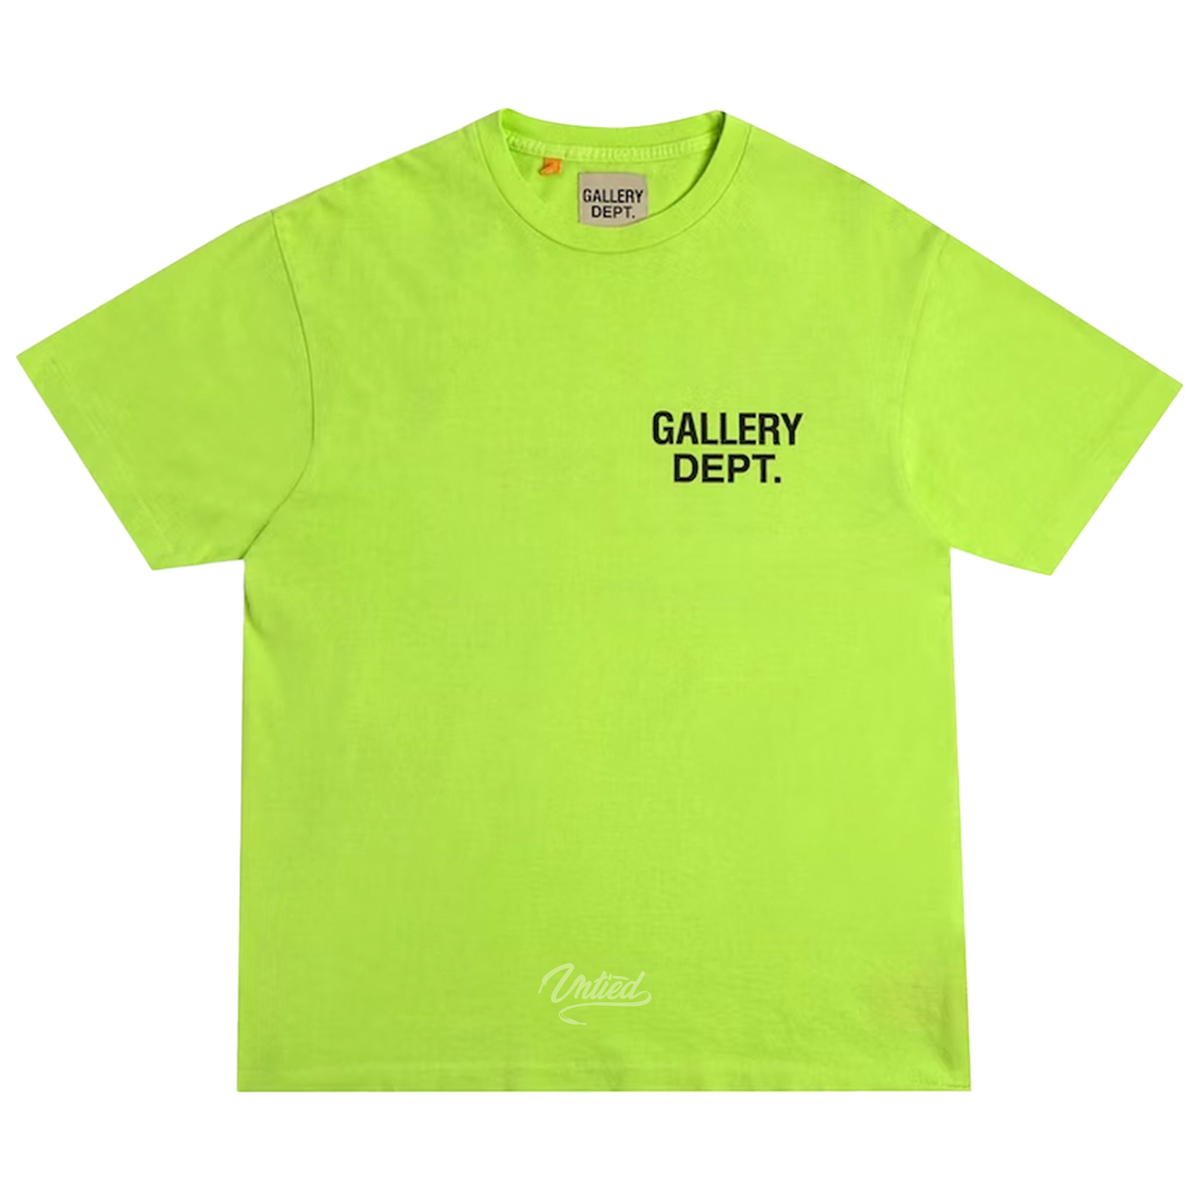 Inspired Gallery Dept T-shirt | escapeauthority.com